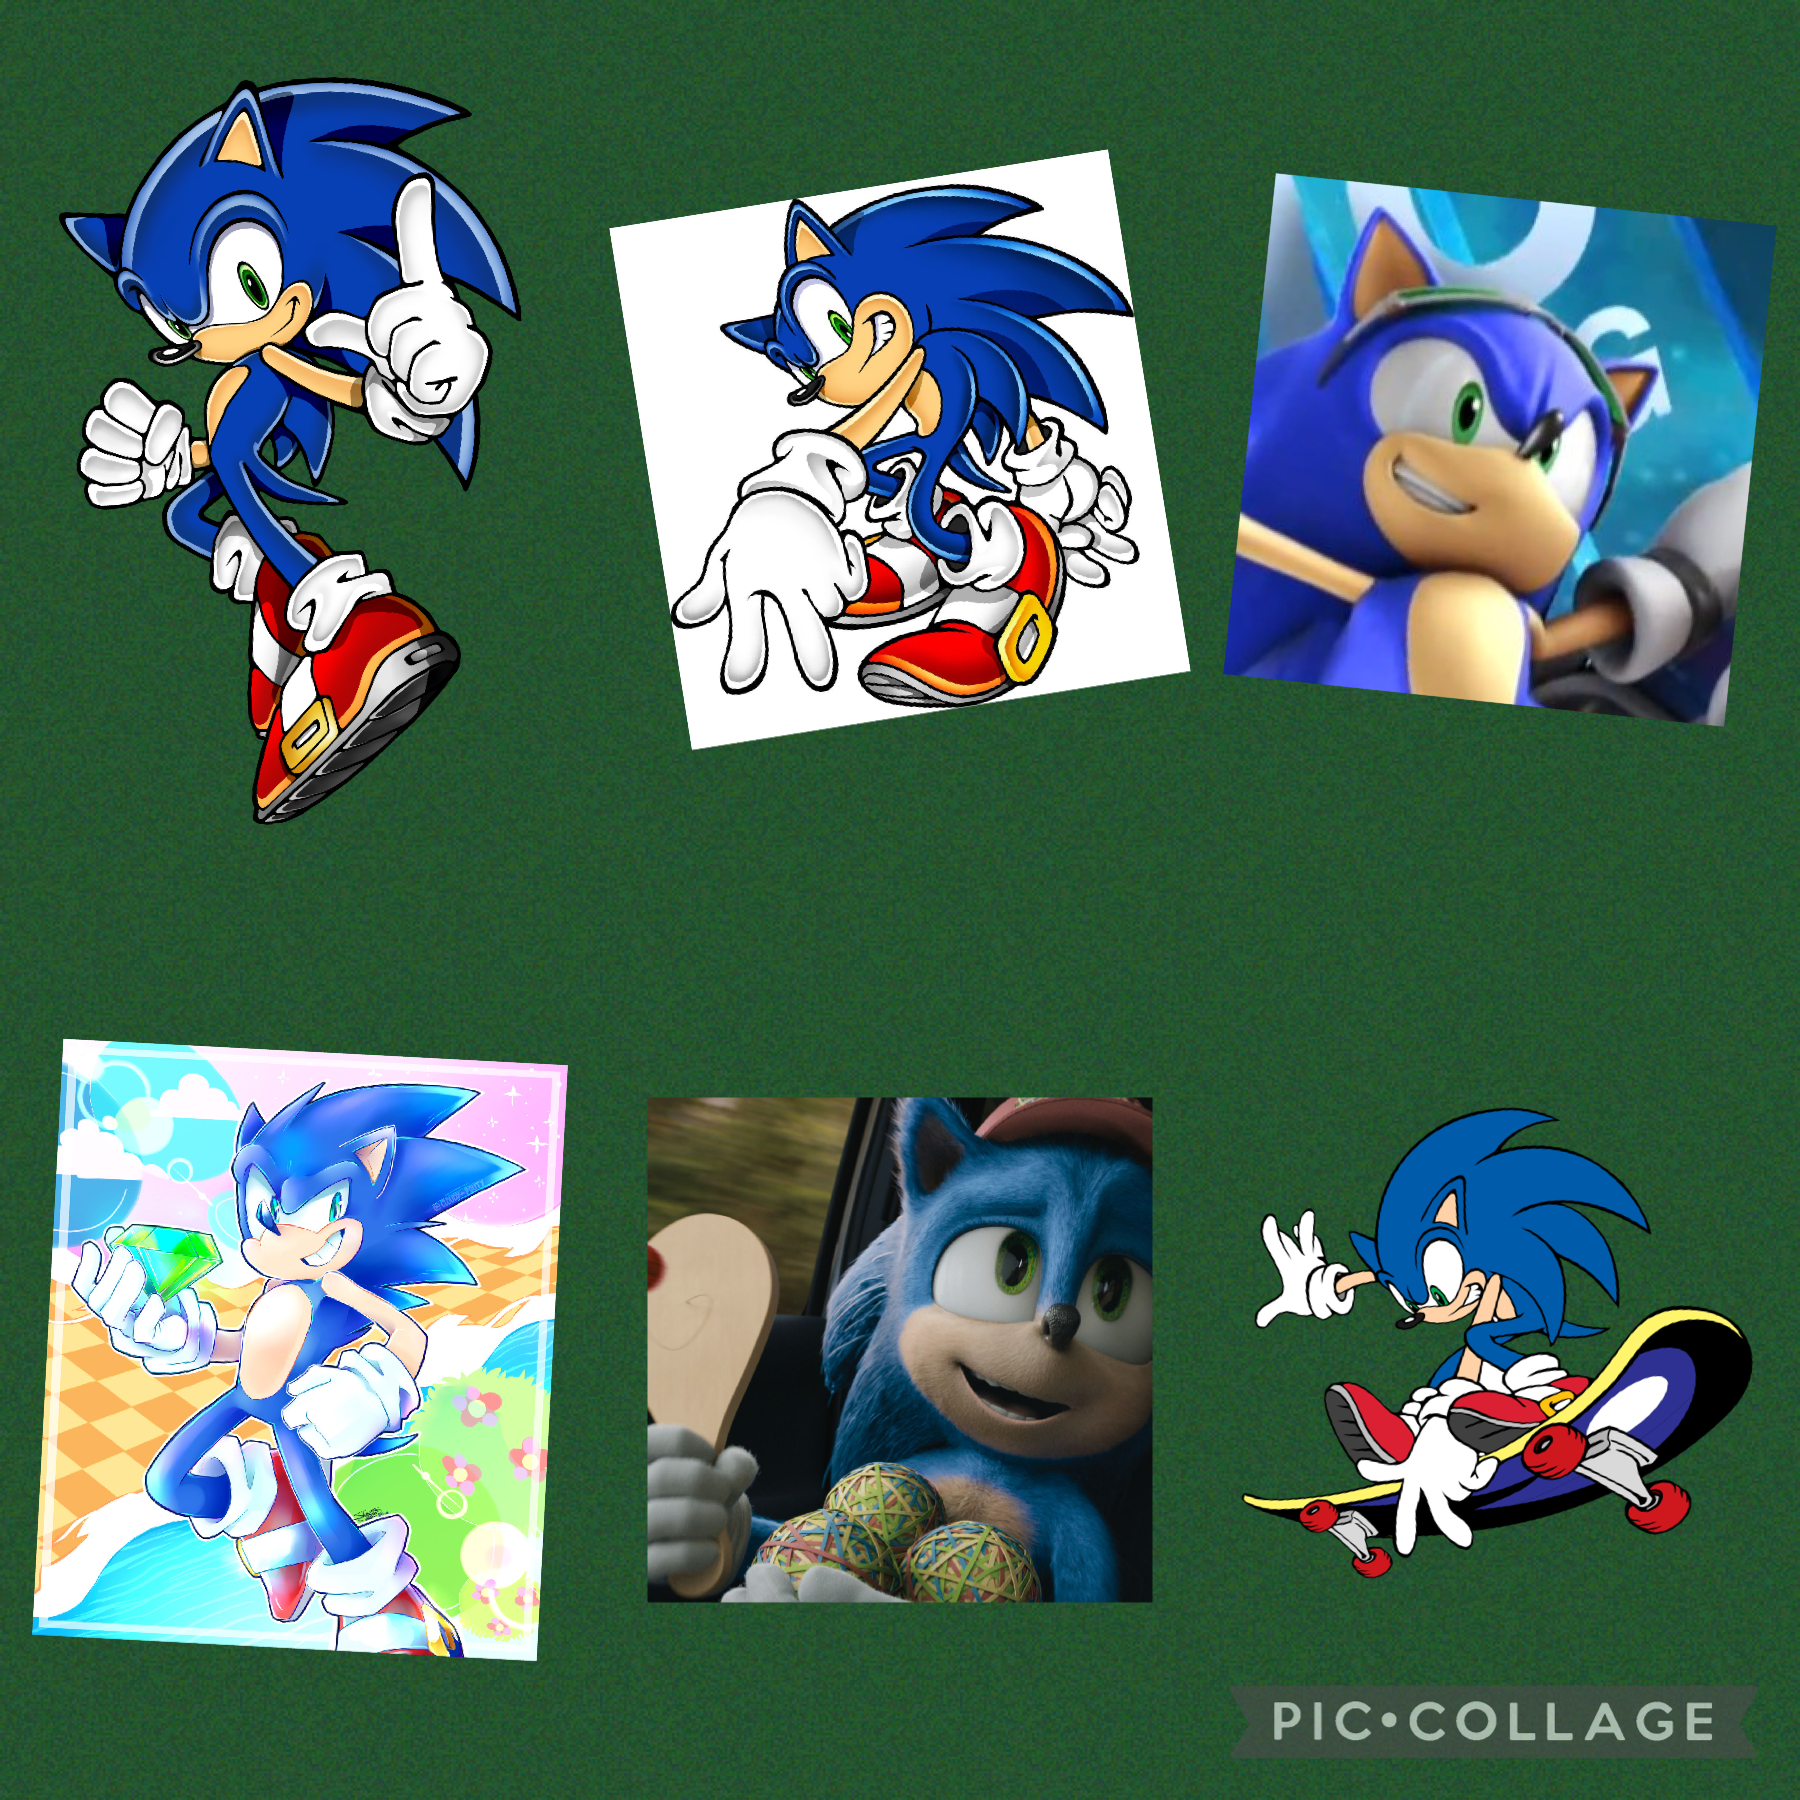 Sonic the Hedgehog aesthetic (I LOVE MY SONIC SO MUCH THAT IT CRACKS ME UP🤣)